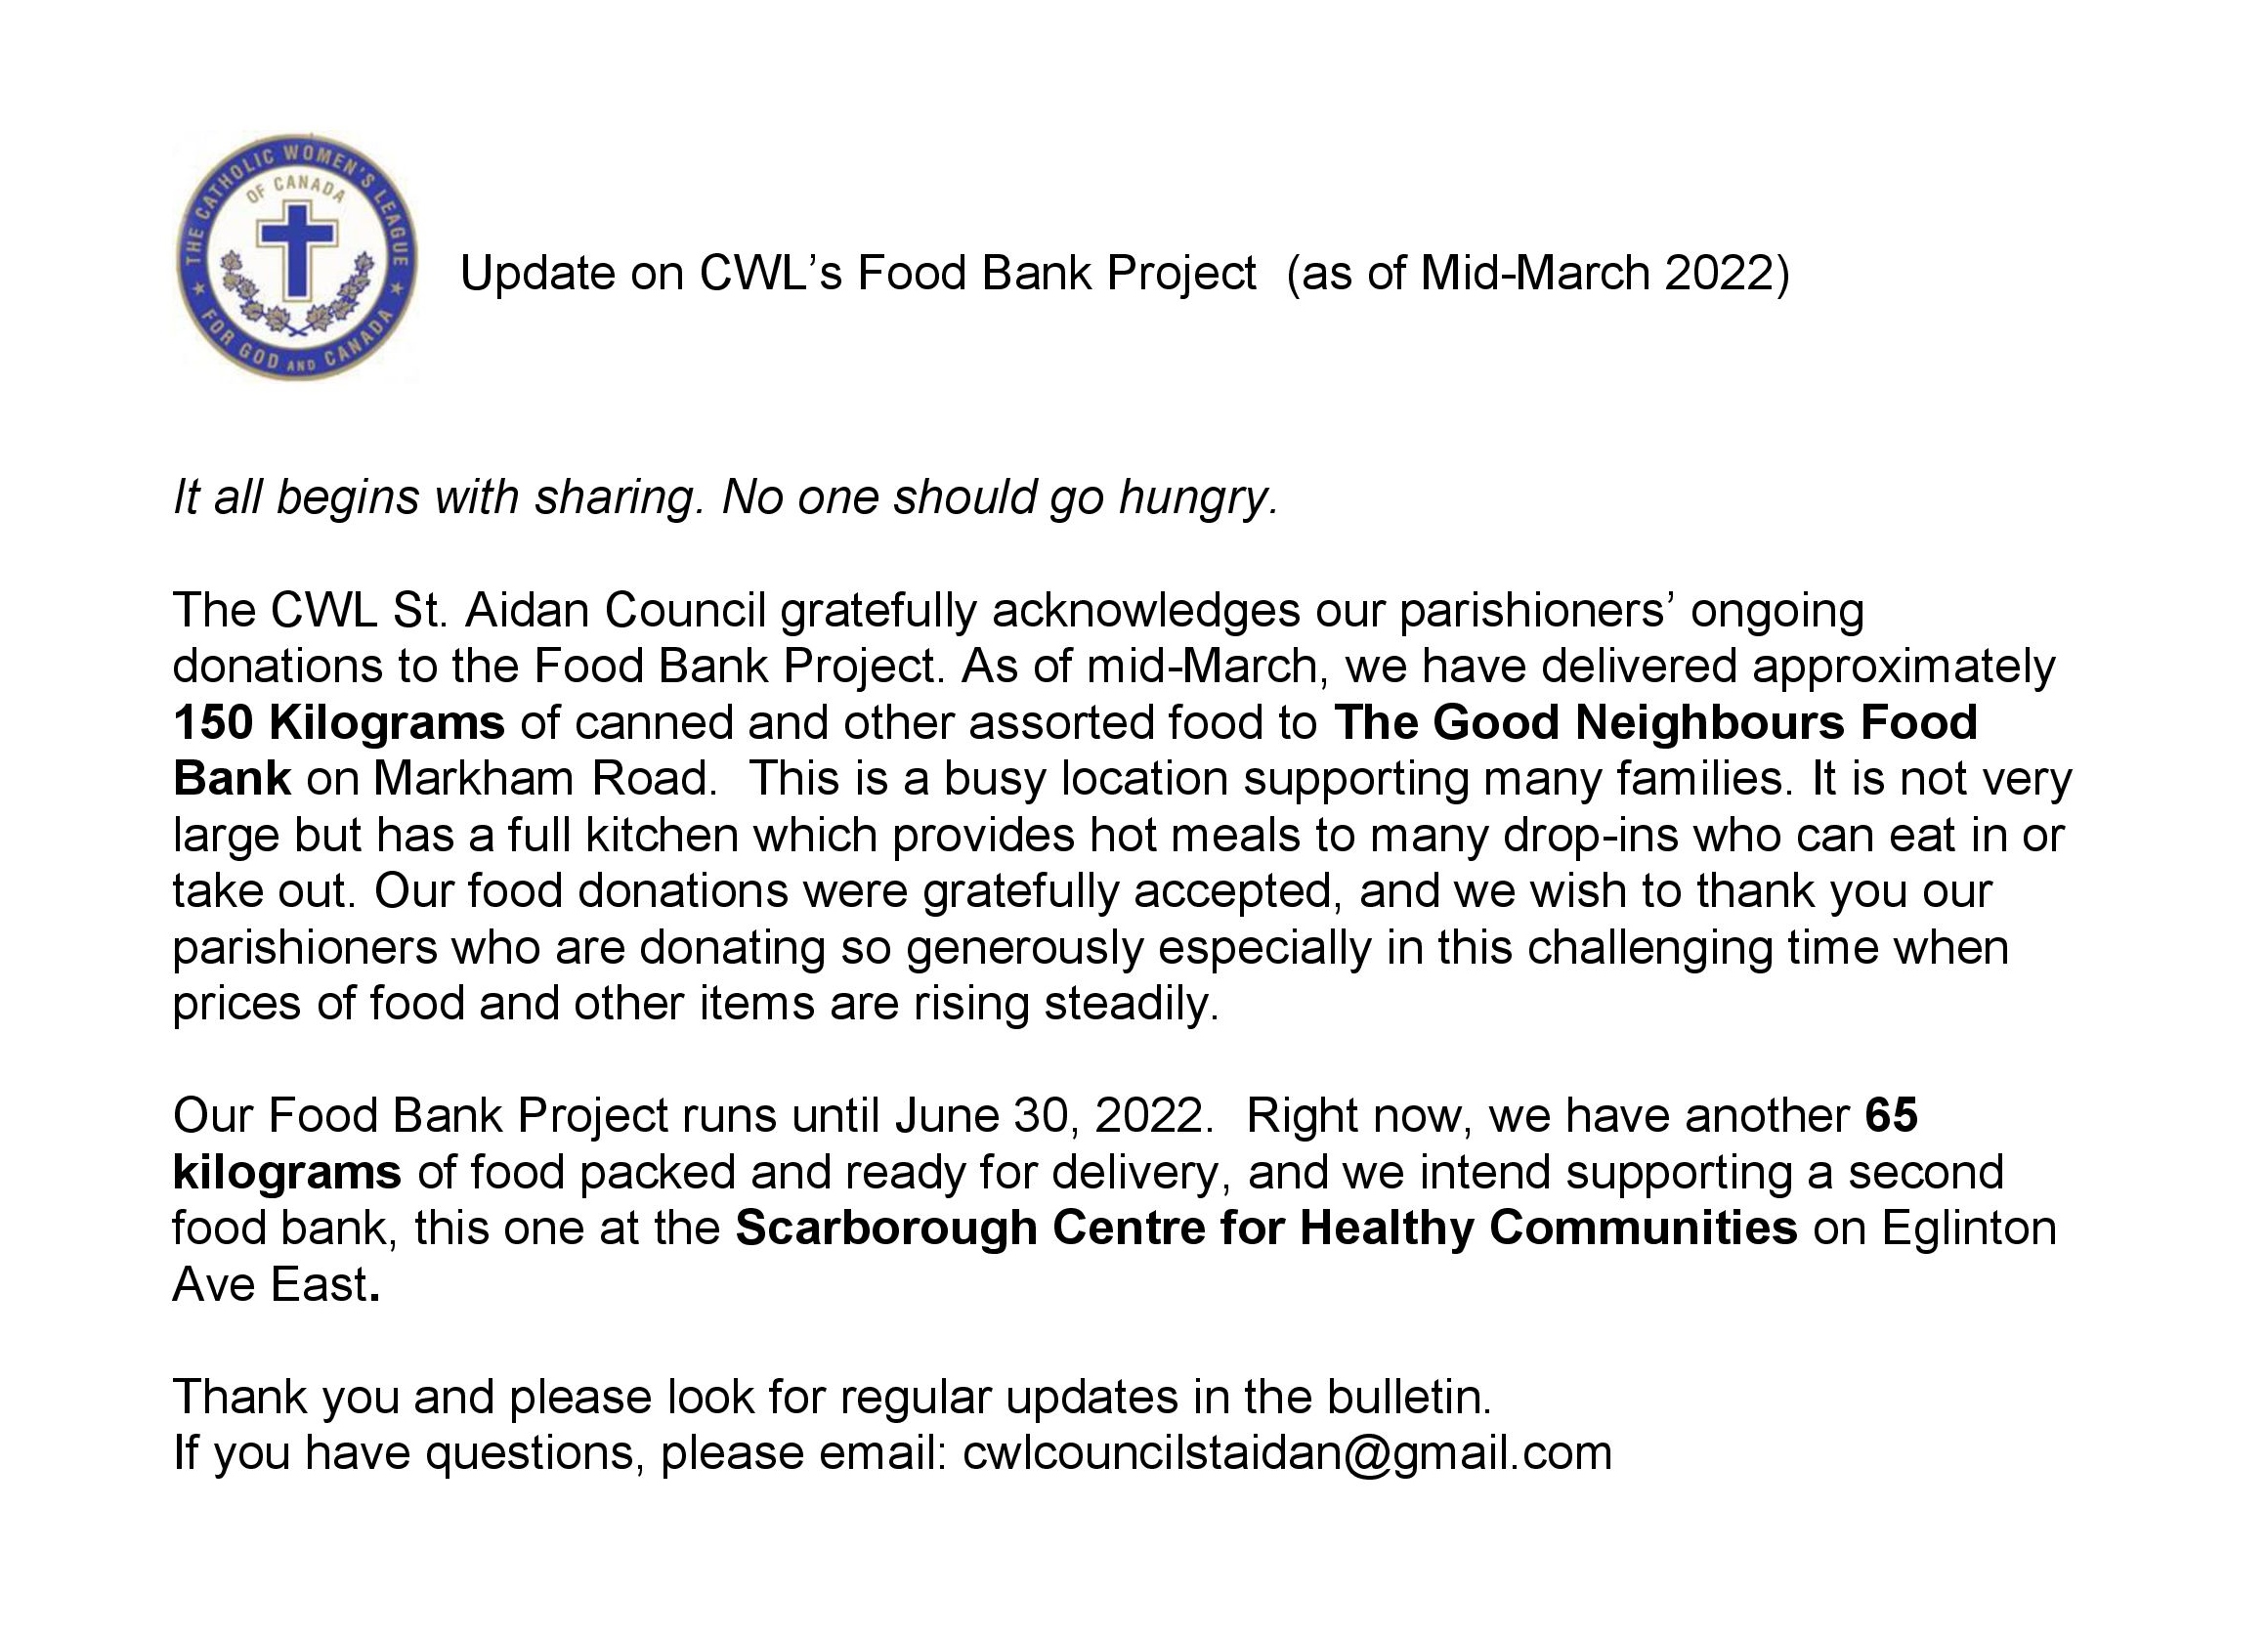 CWL Food Bank Project Update - mid-March 2022